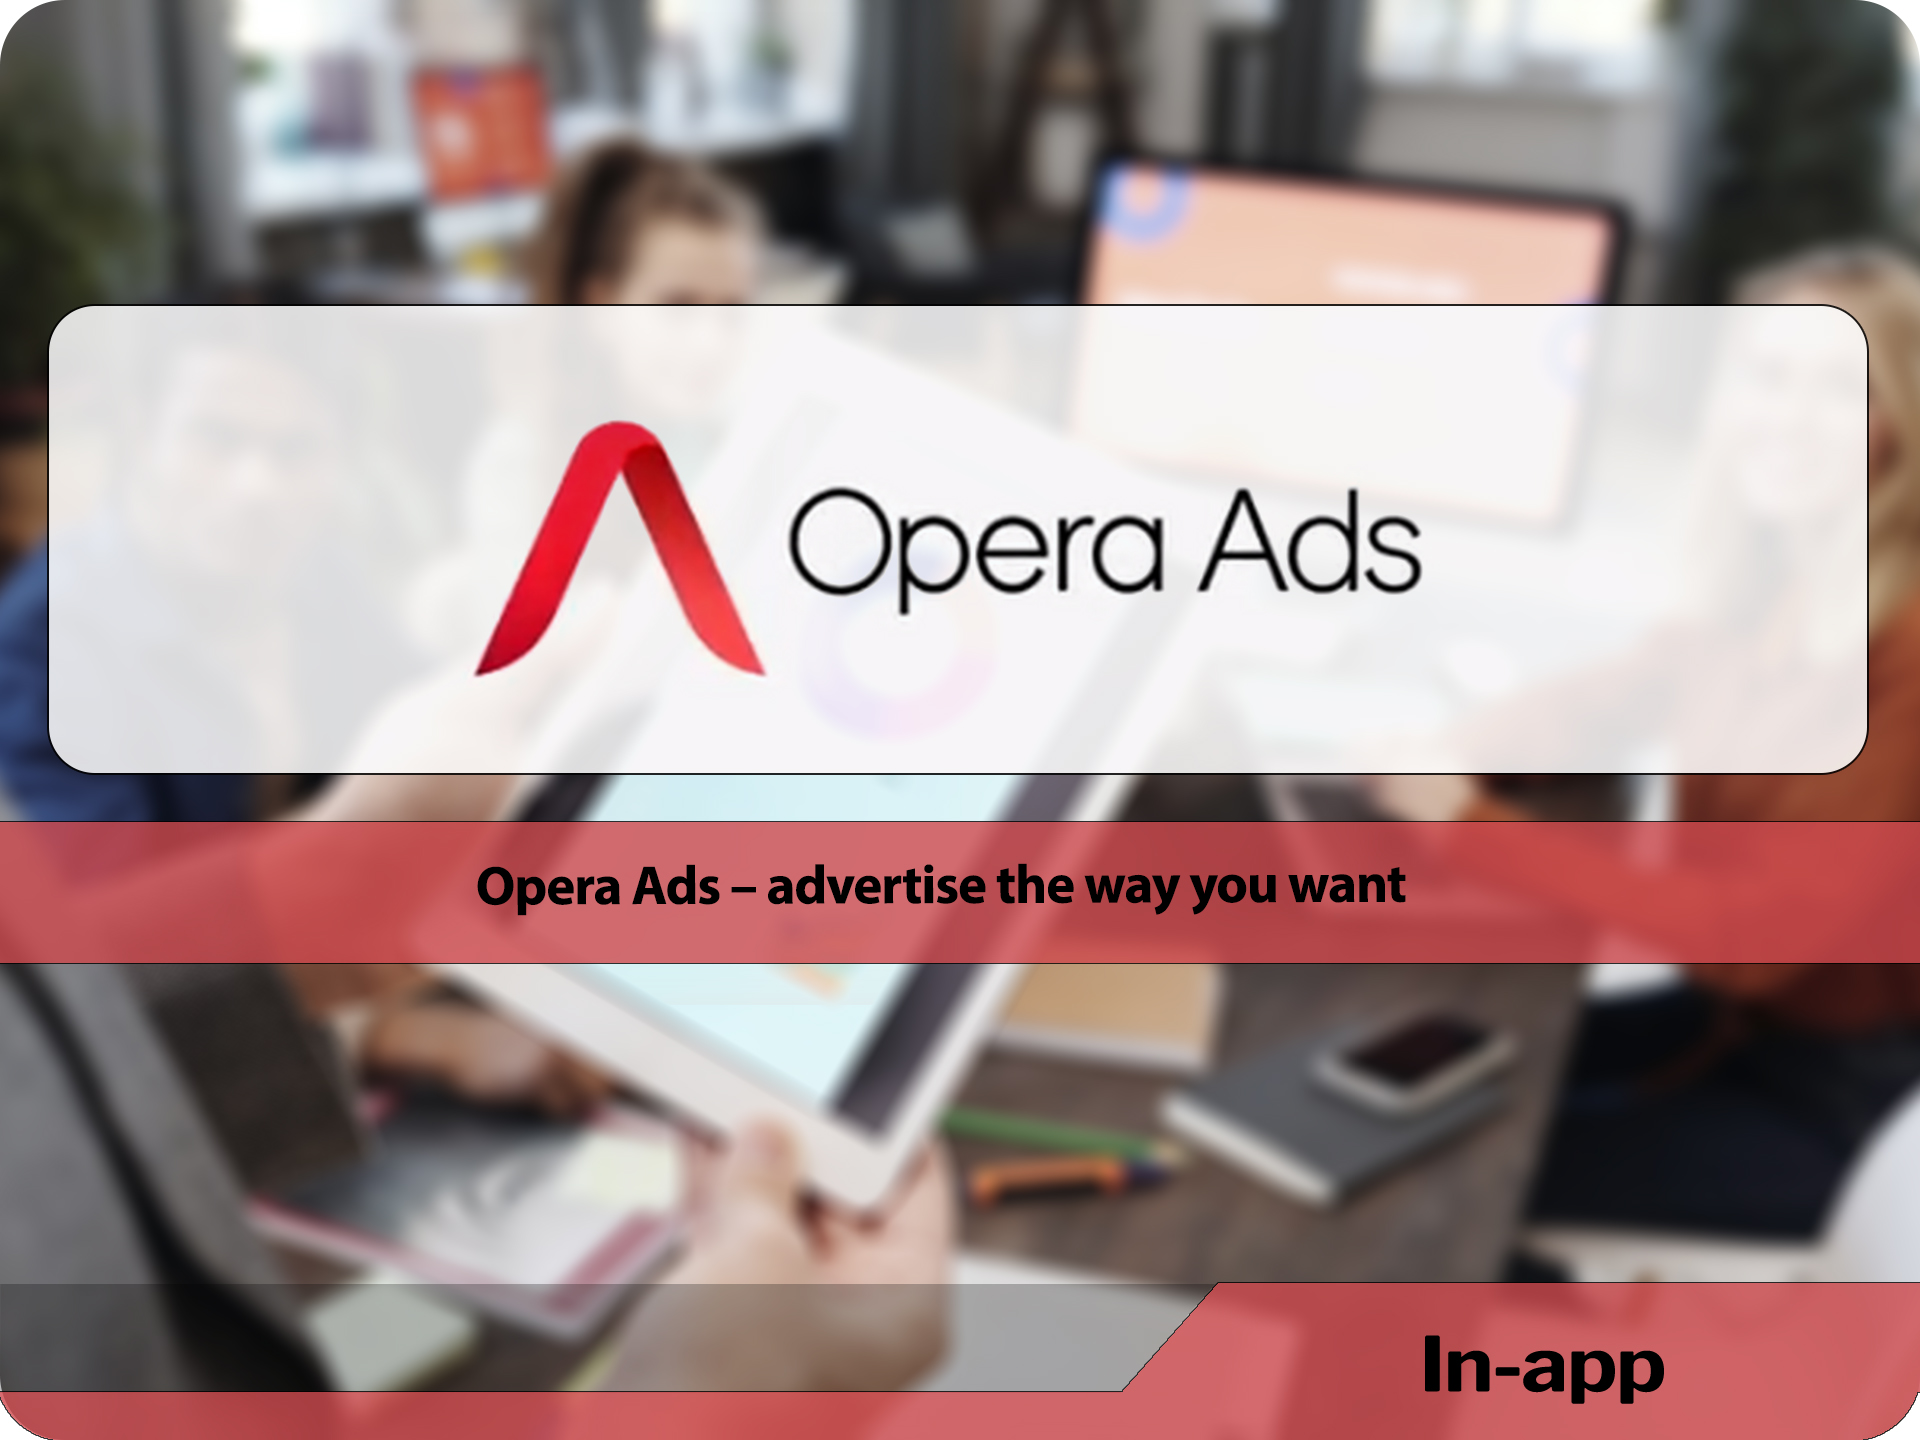 Opera Ads – advertise the way you want